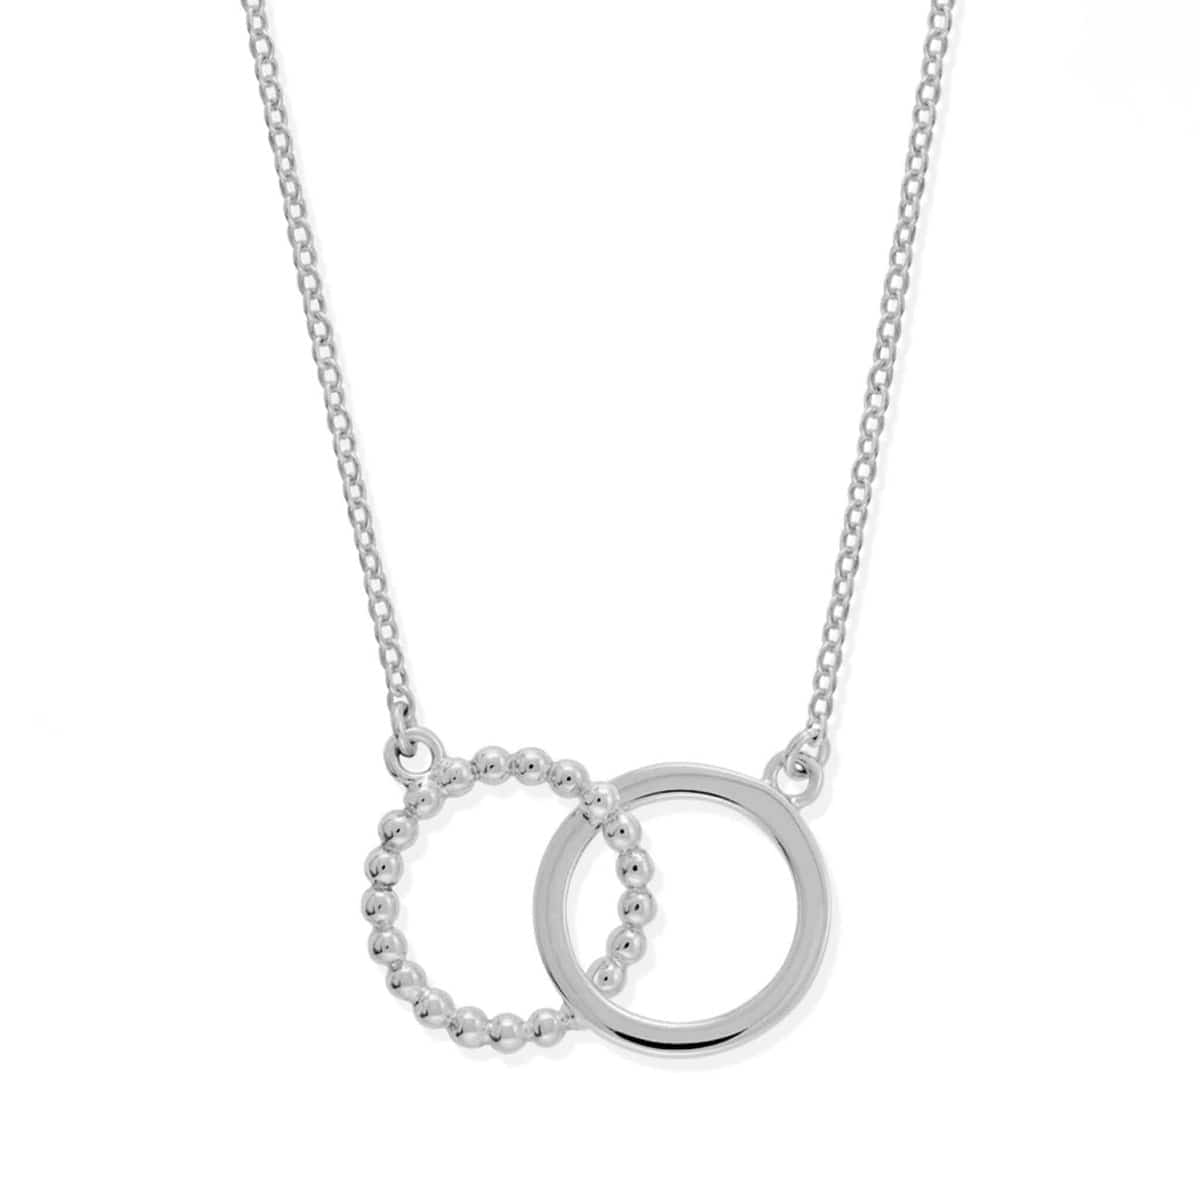 Boma Jewelry Necklaces Sterling Silver Deluxe Dot Circle Pendant Necklace